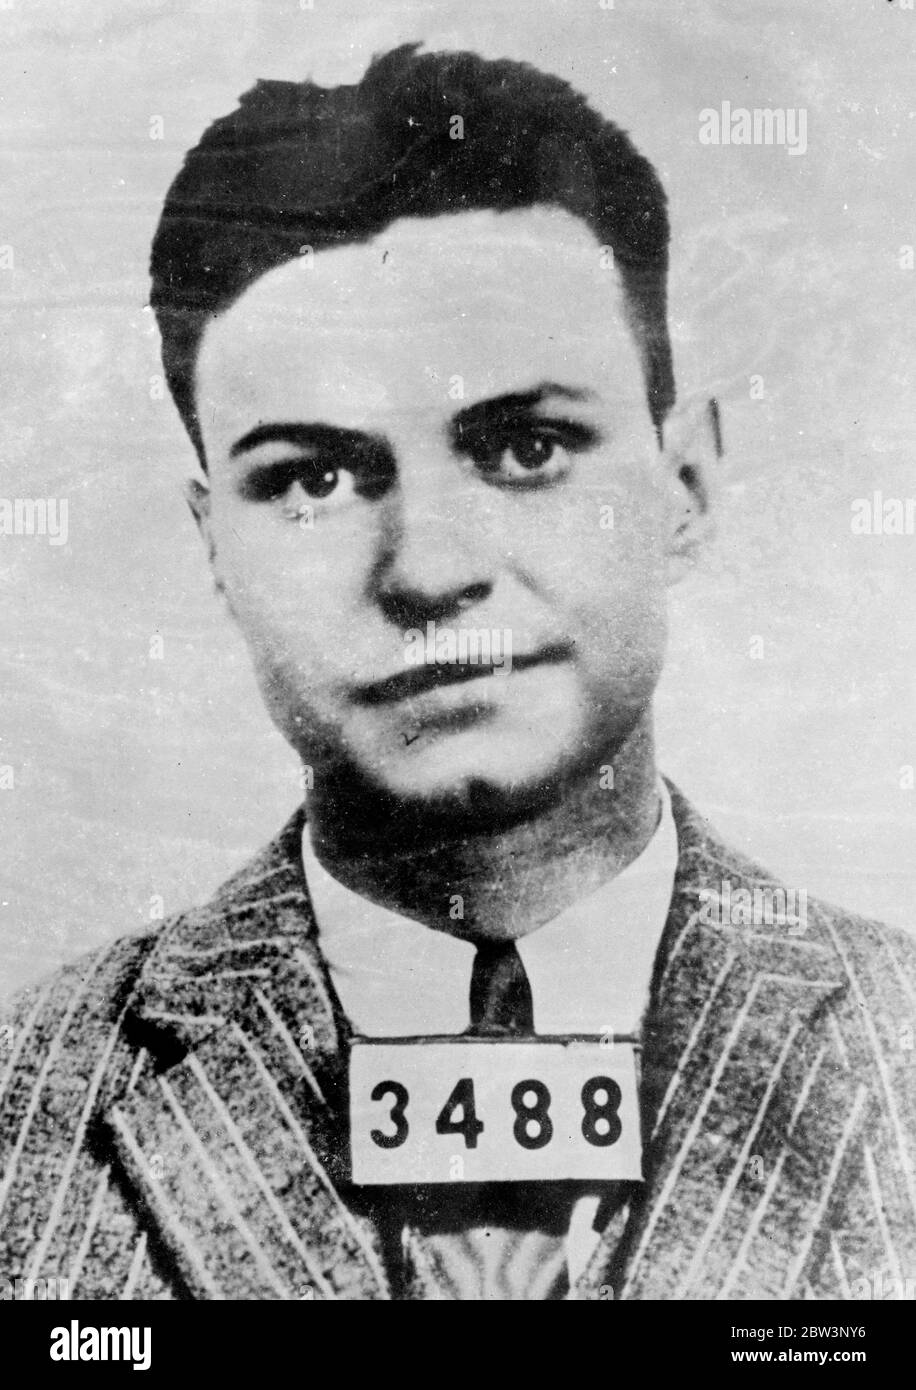 Thomas H Robinson , kidnapper of Mrs Stall , the beautiful society woman of Louisville ( Kentucky ) , has been captured at Glendale , California , after a 19 month hunt . By his arrest , states Mr Edgar Hoover , Head of the G Men , G men have completed their round up of public enemies in the United States. Robinson is on his way by air under guard to Lousiville where he will be confronted with Mrs Stoll , for whose release a £ 10 , 000 ransom was paid . Photo shows , Thomas H Robinson . 12 May 1936 Stock Photo